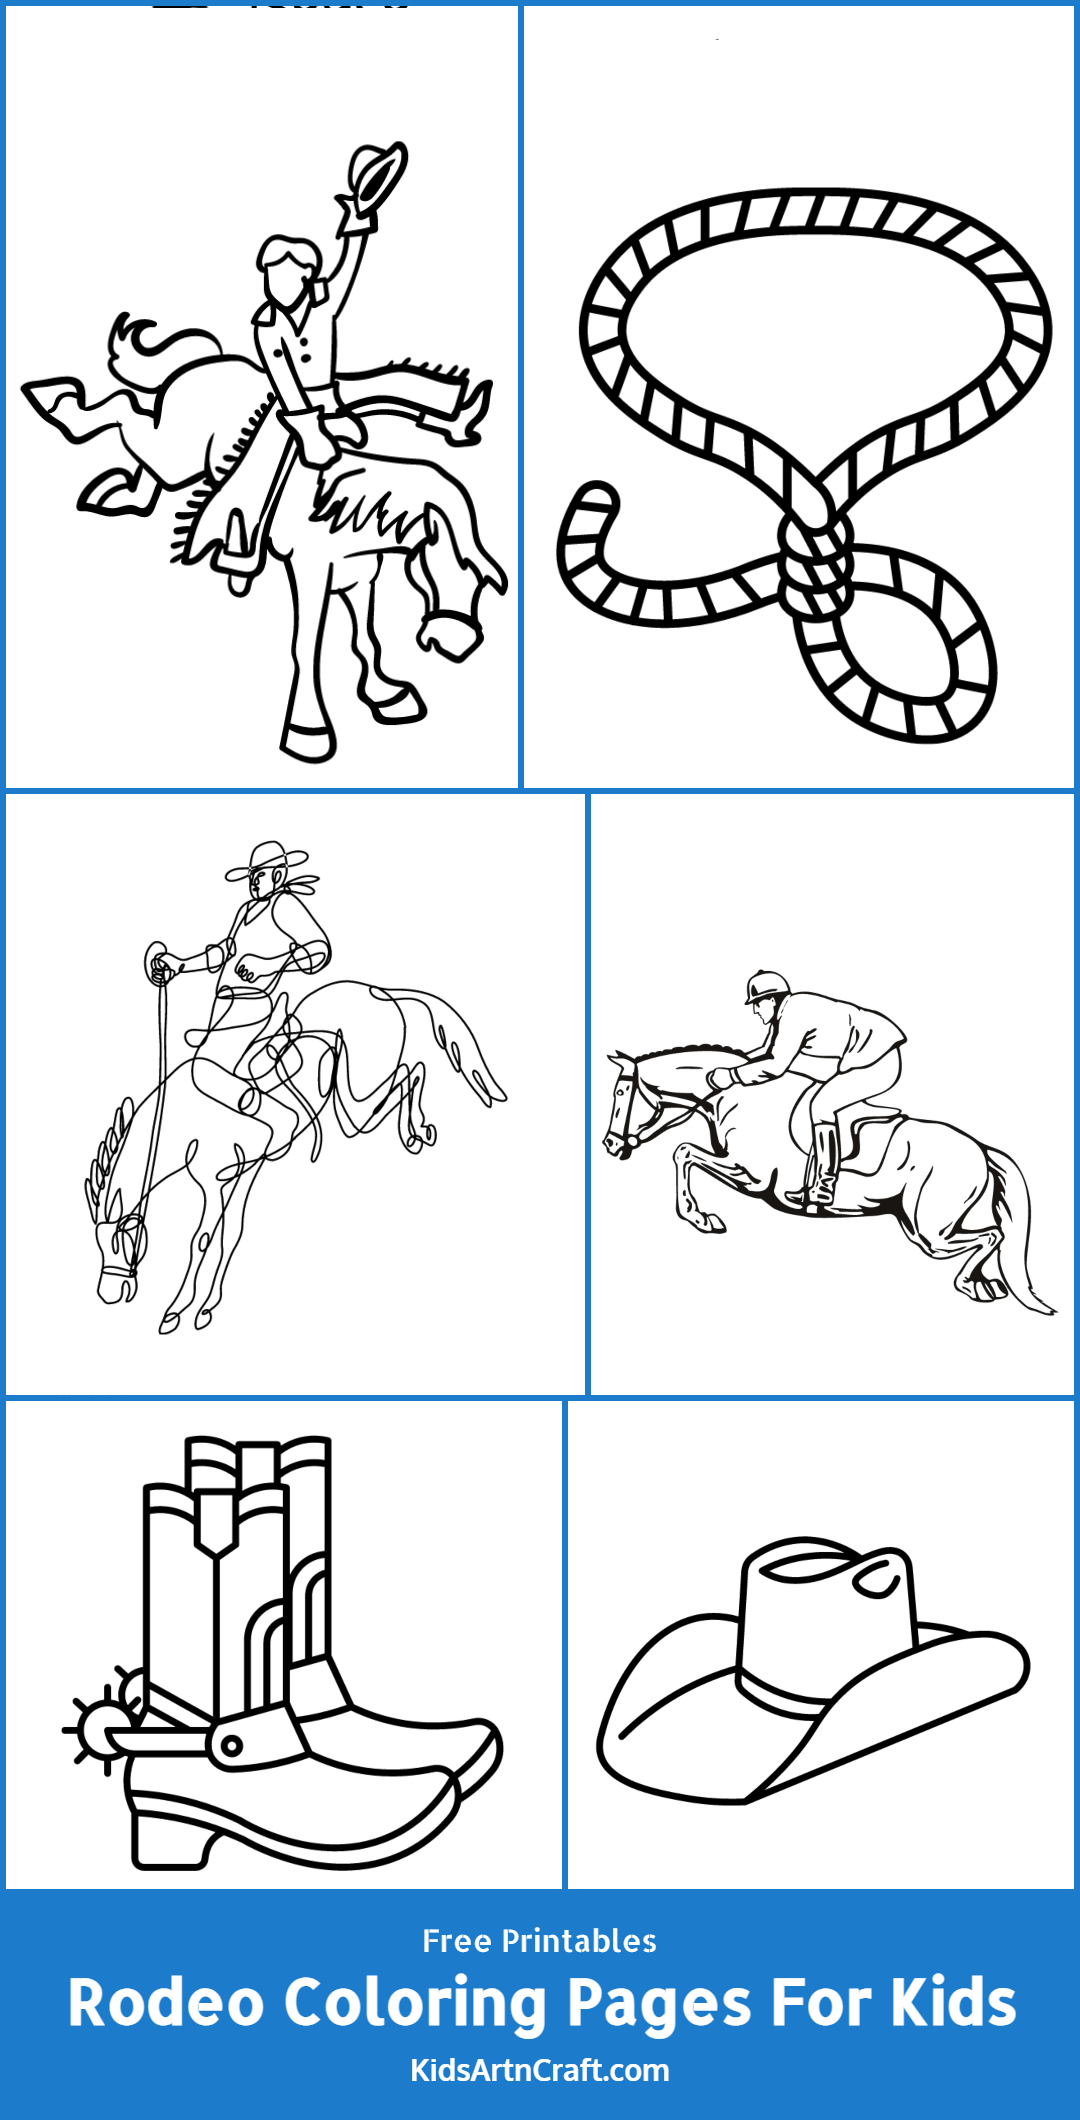 Rodeo Coloring Pages For Kids – Free Printables